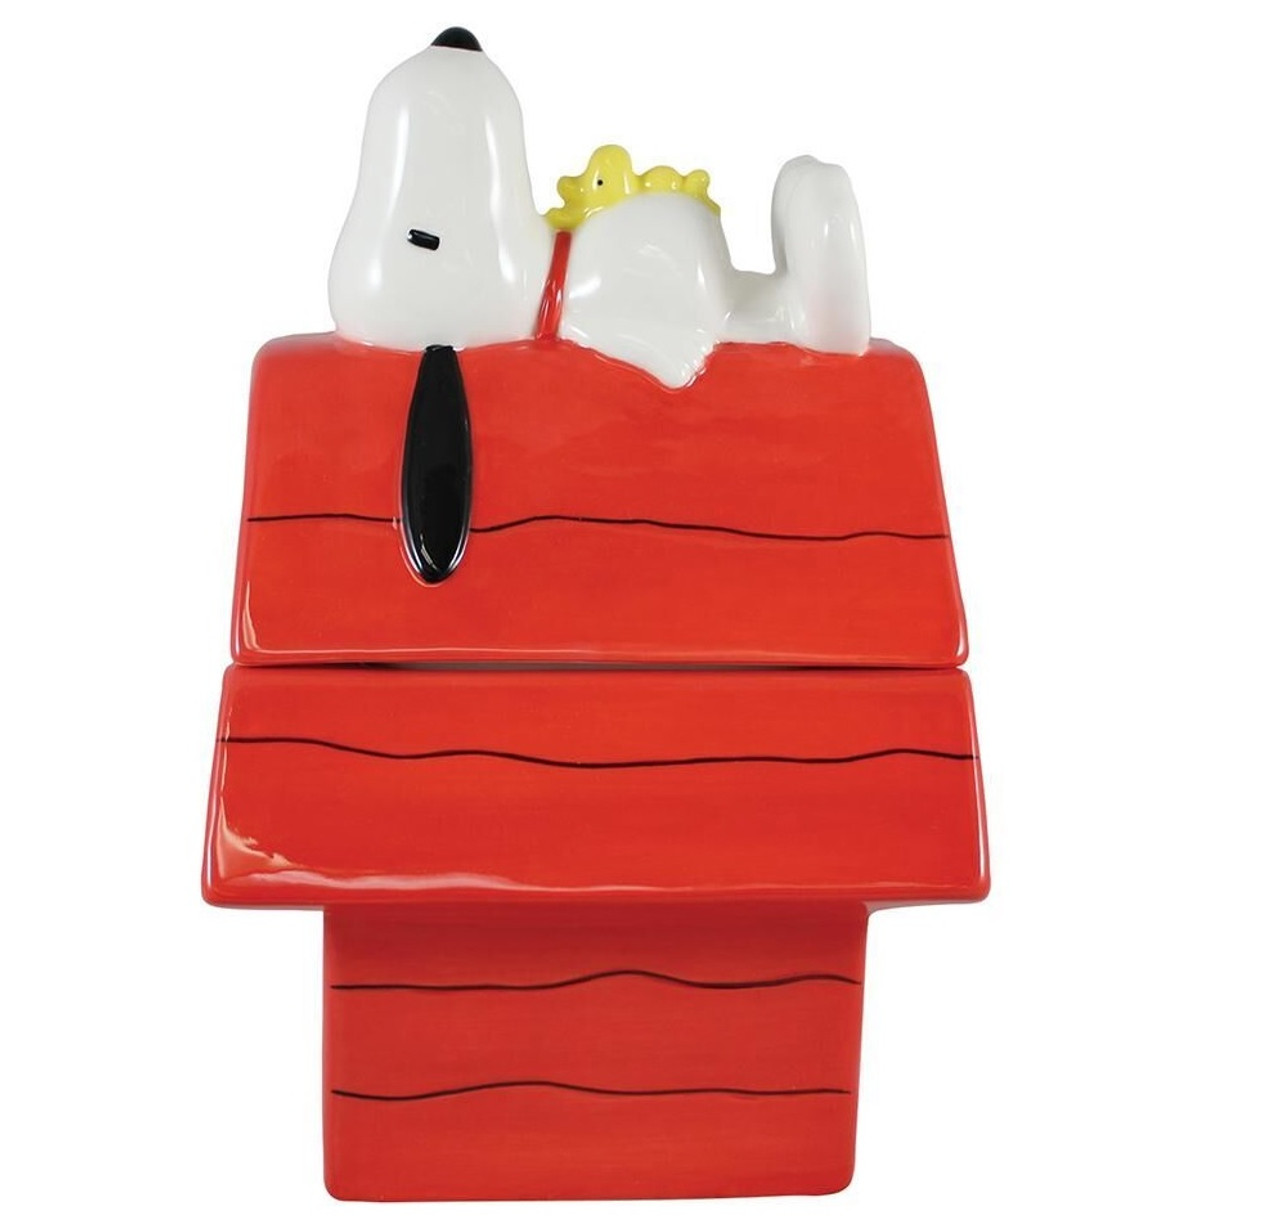 Peanuts Snoopy Doghouse Sculpted Cookie Jar